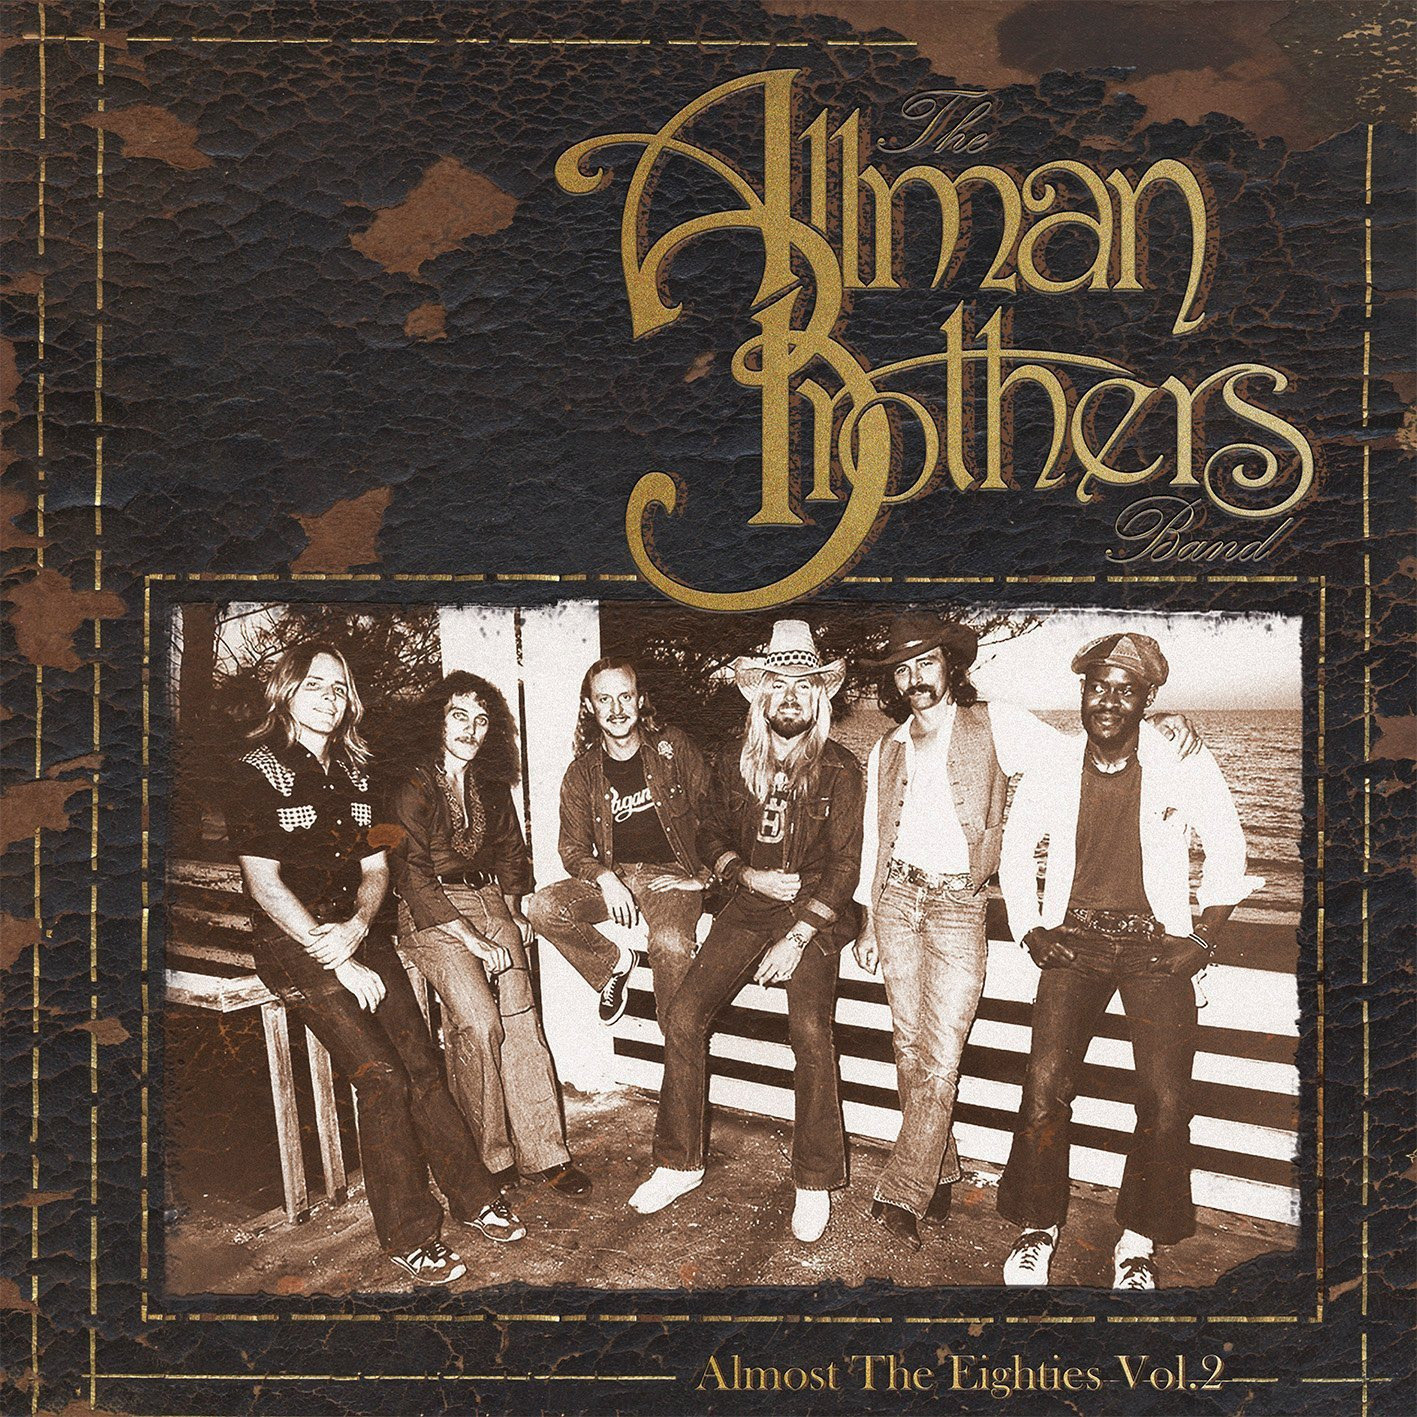 The Allman Brothers Band - Almost The Eighties Vol. 2 (2 LP) The Allman Brothers Band